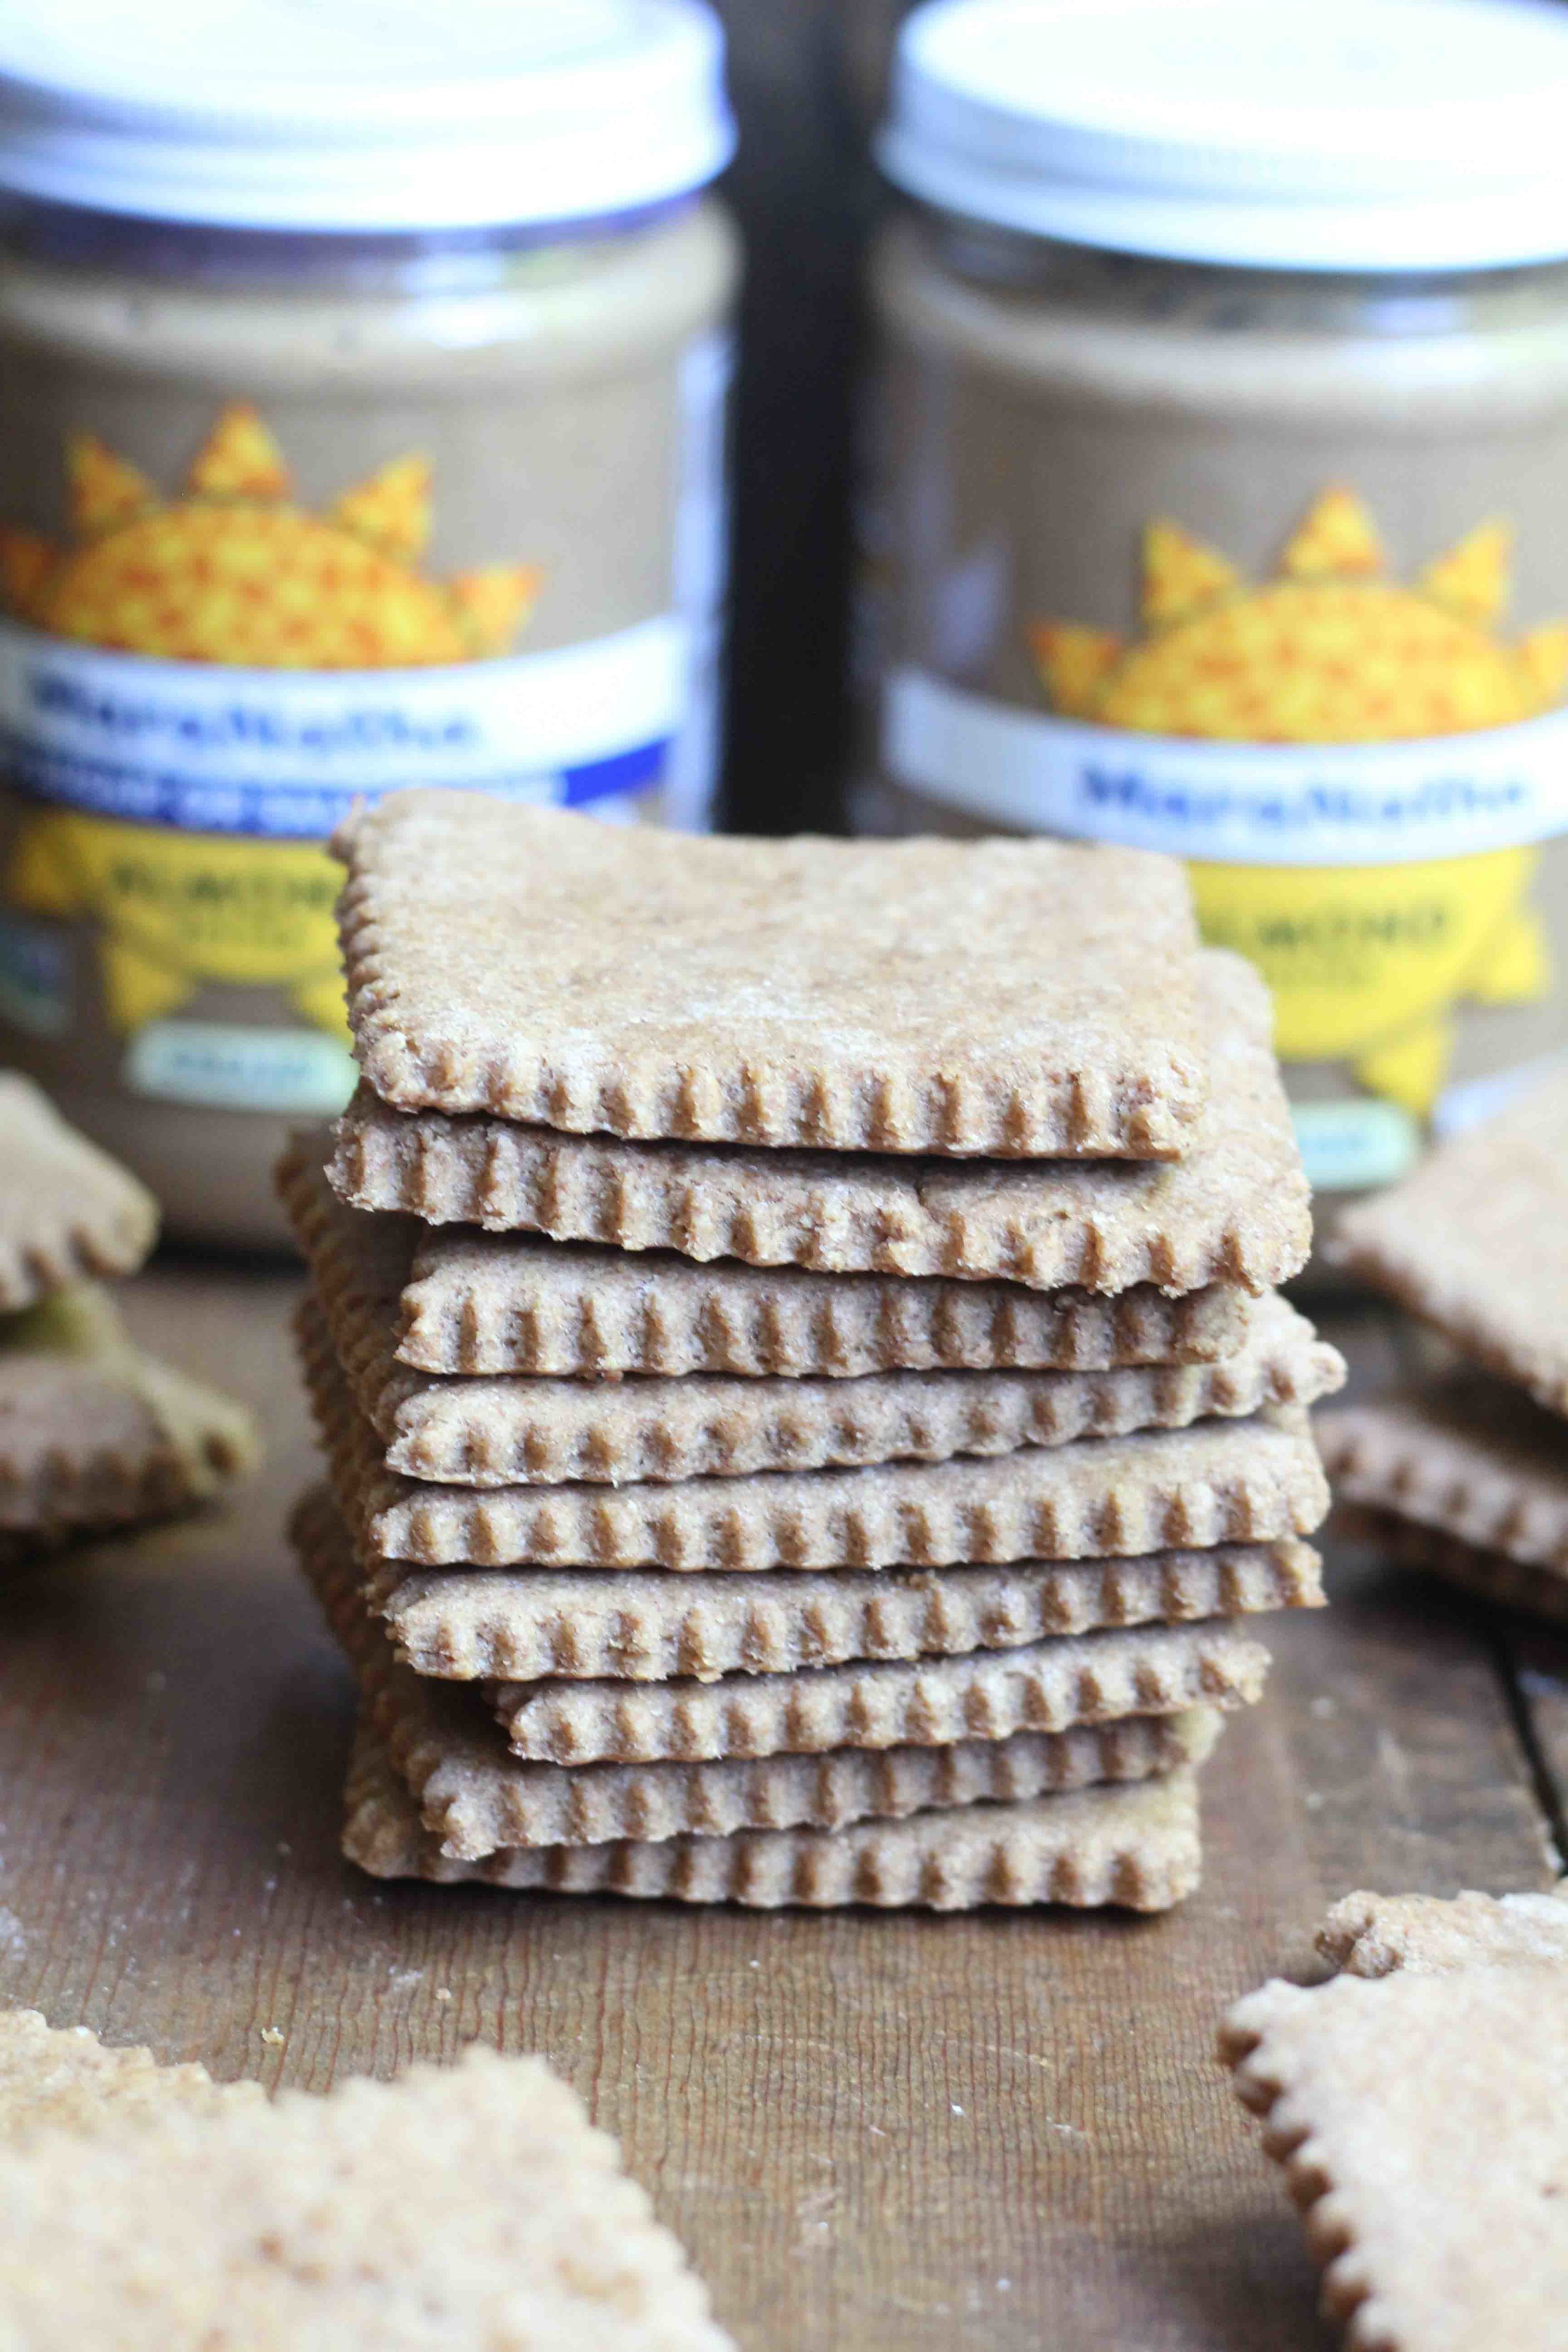 These low sugar, whole wheat Almond Butter Graham Crackers make a perfect snack. If you have a sweet tooth, dip these in dark chocolate for an indulgent healthy treat.